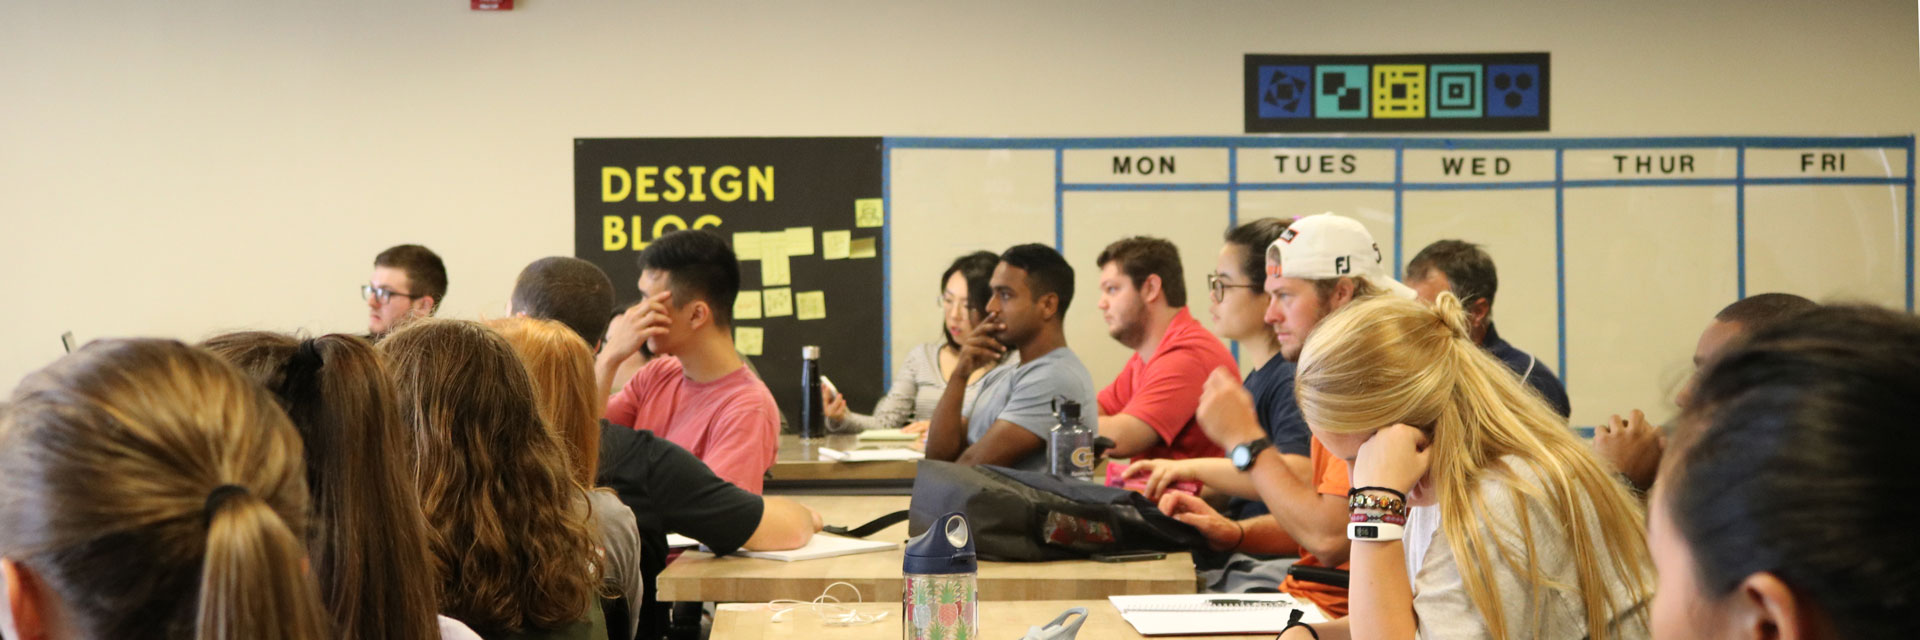 An audience of students, viewed from the side, listens intently to a Design Bloc professor at the front of the class.